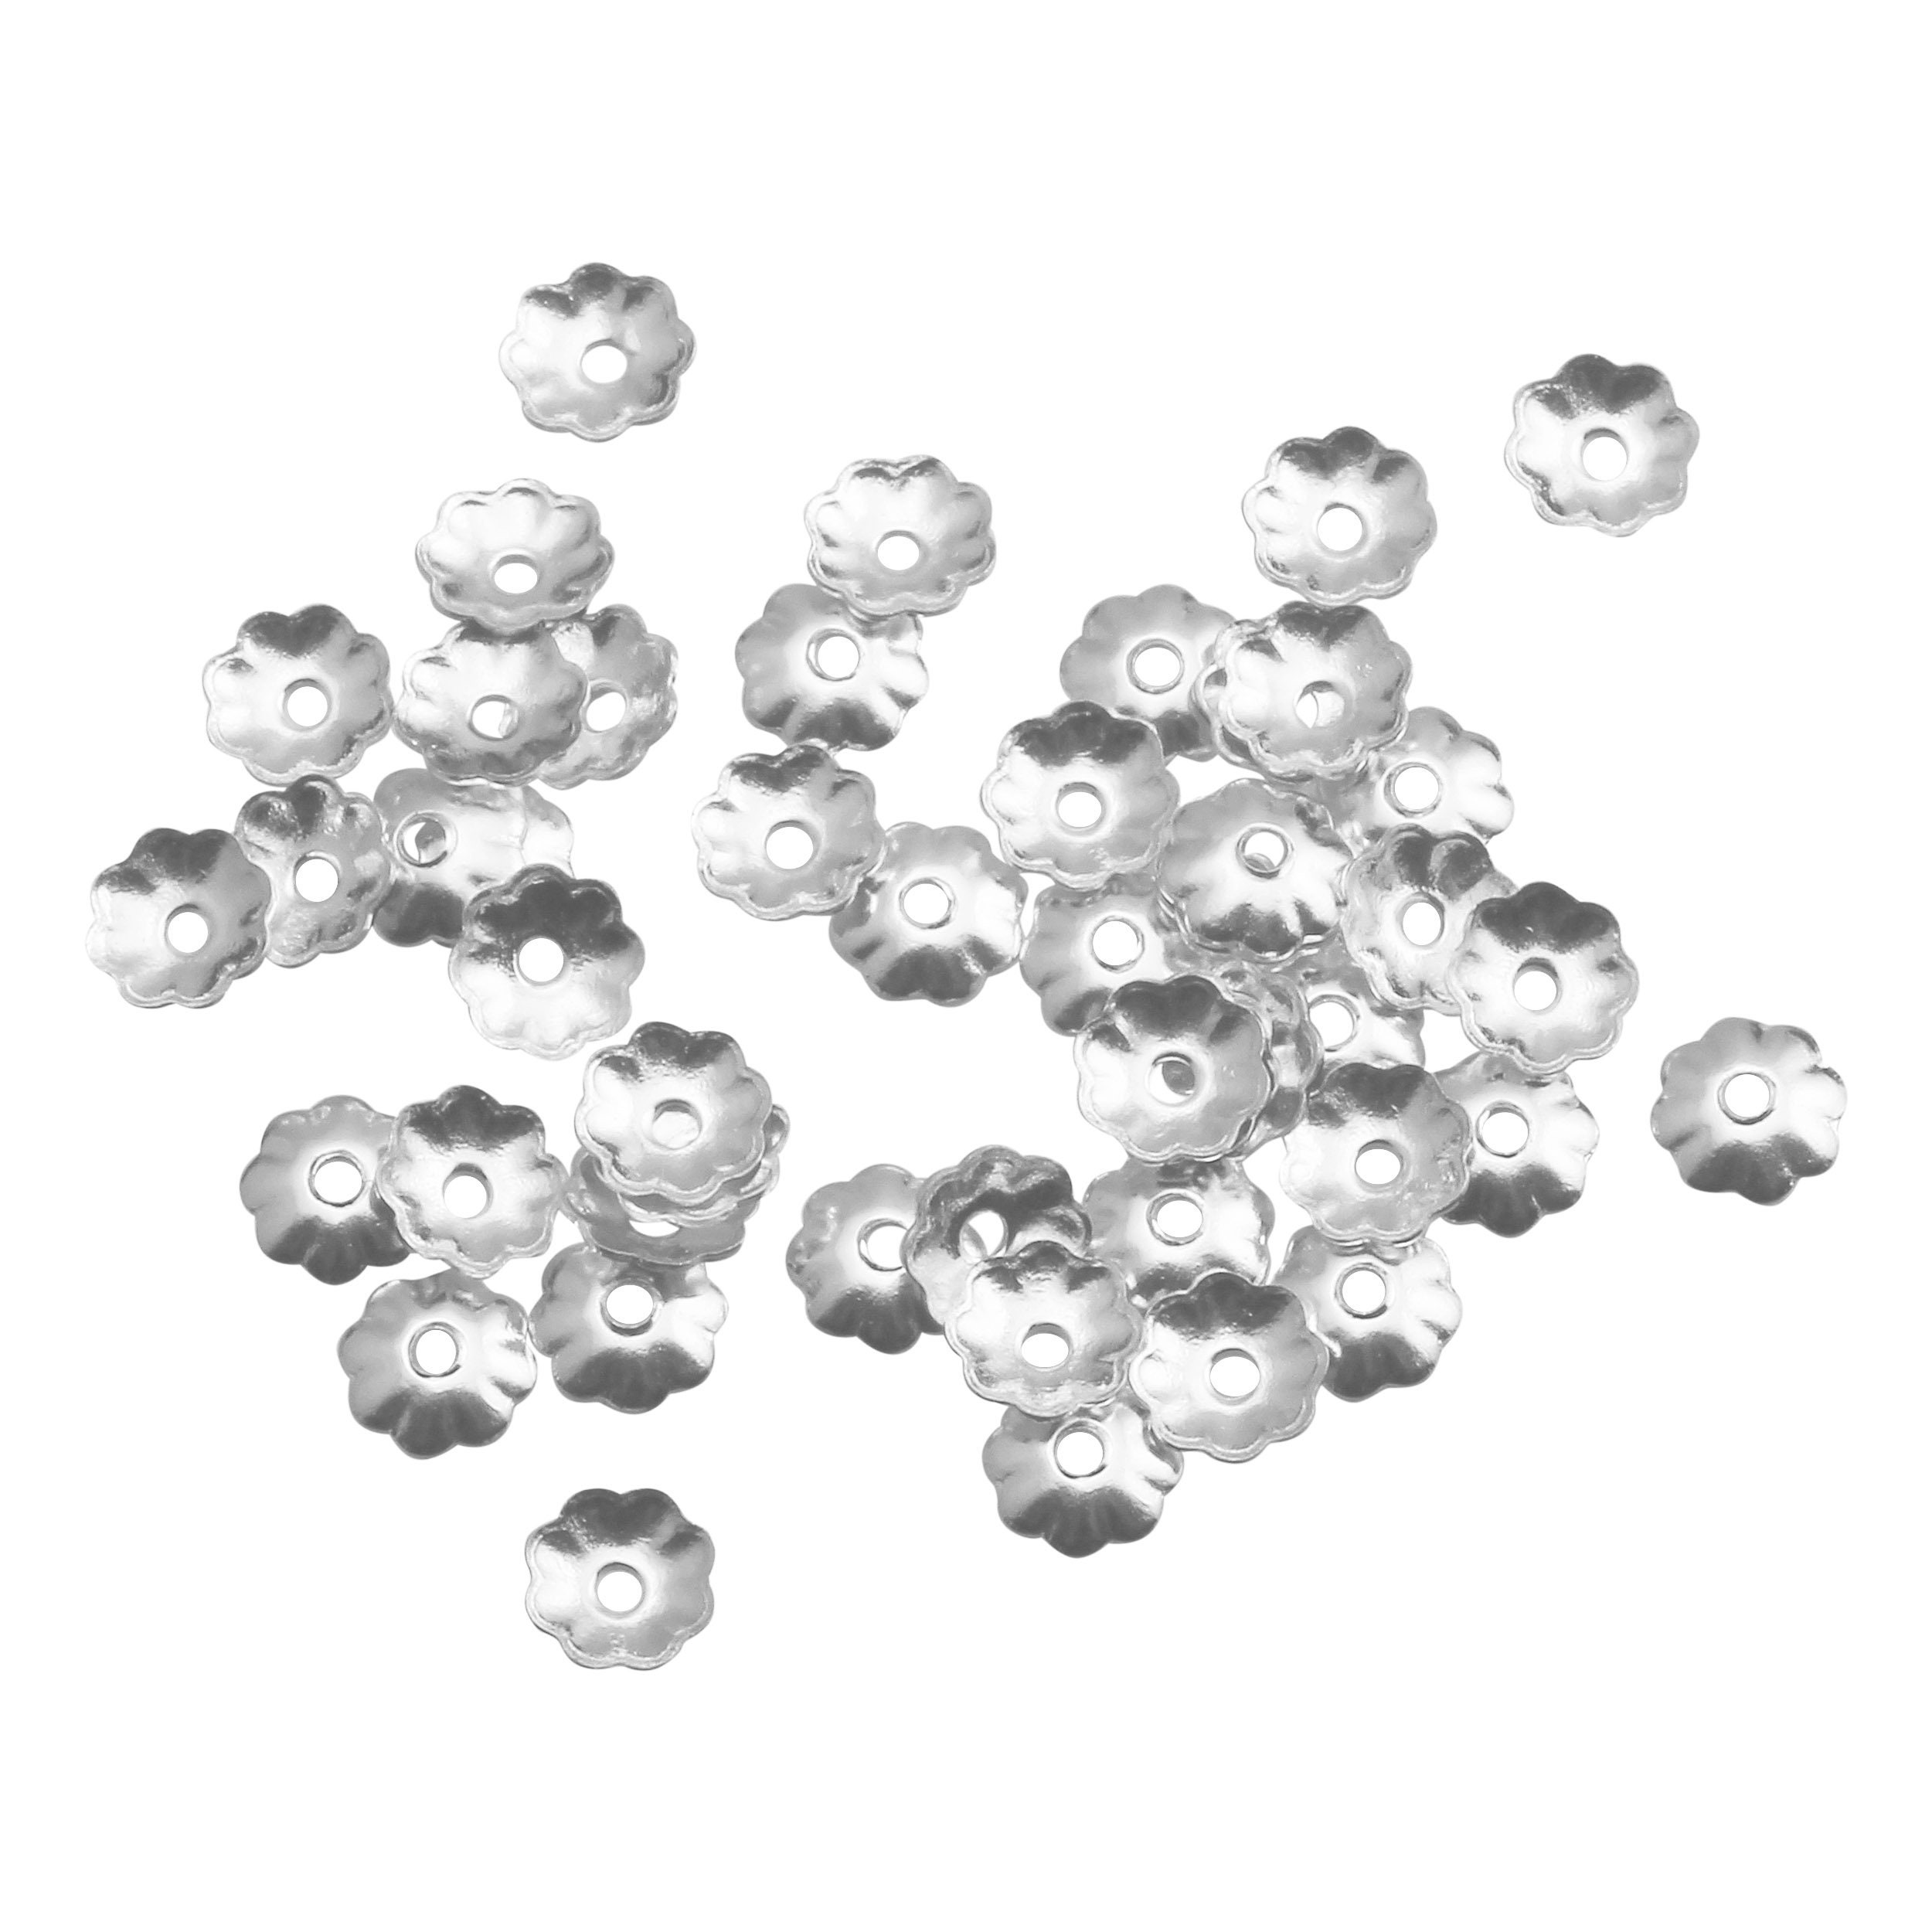 3mm Tiny Flower Bead Caps Sterling Silver - 100 pcs-C95-3